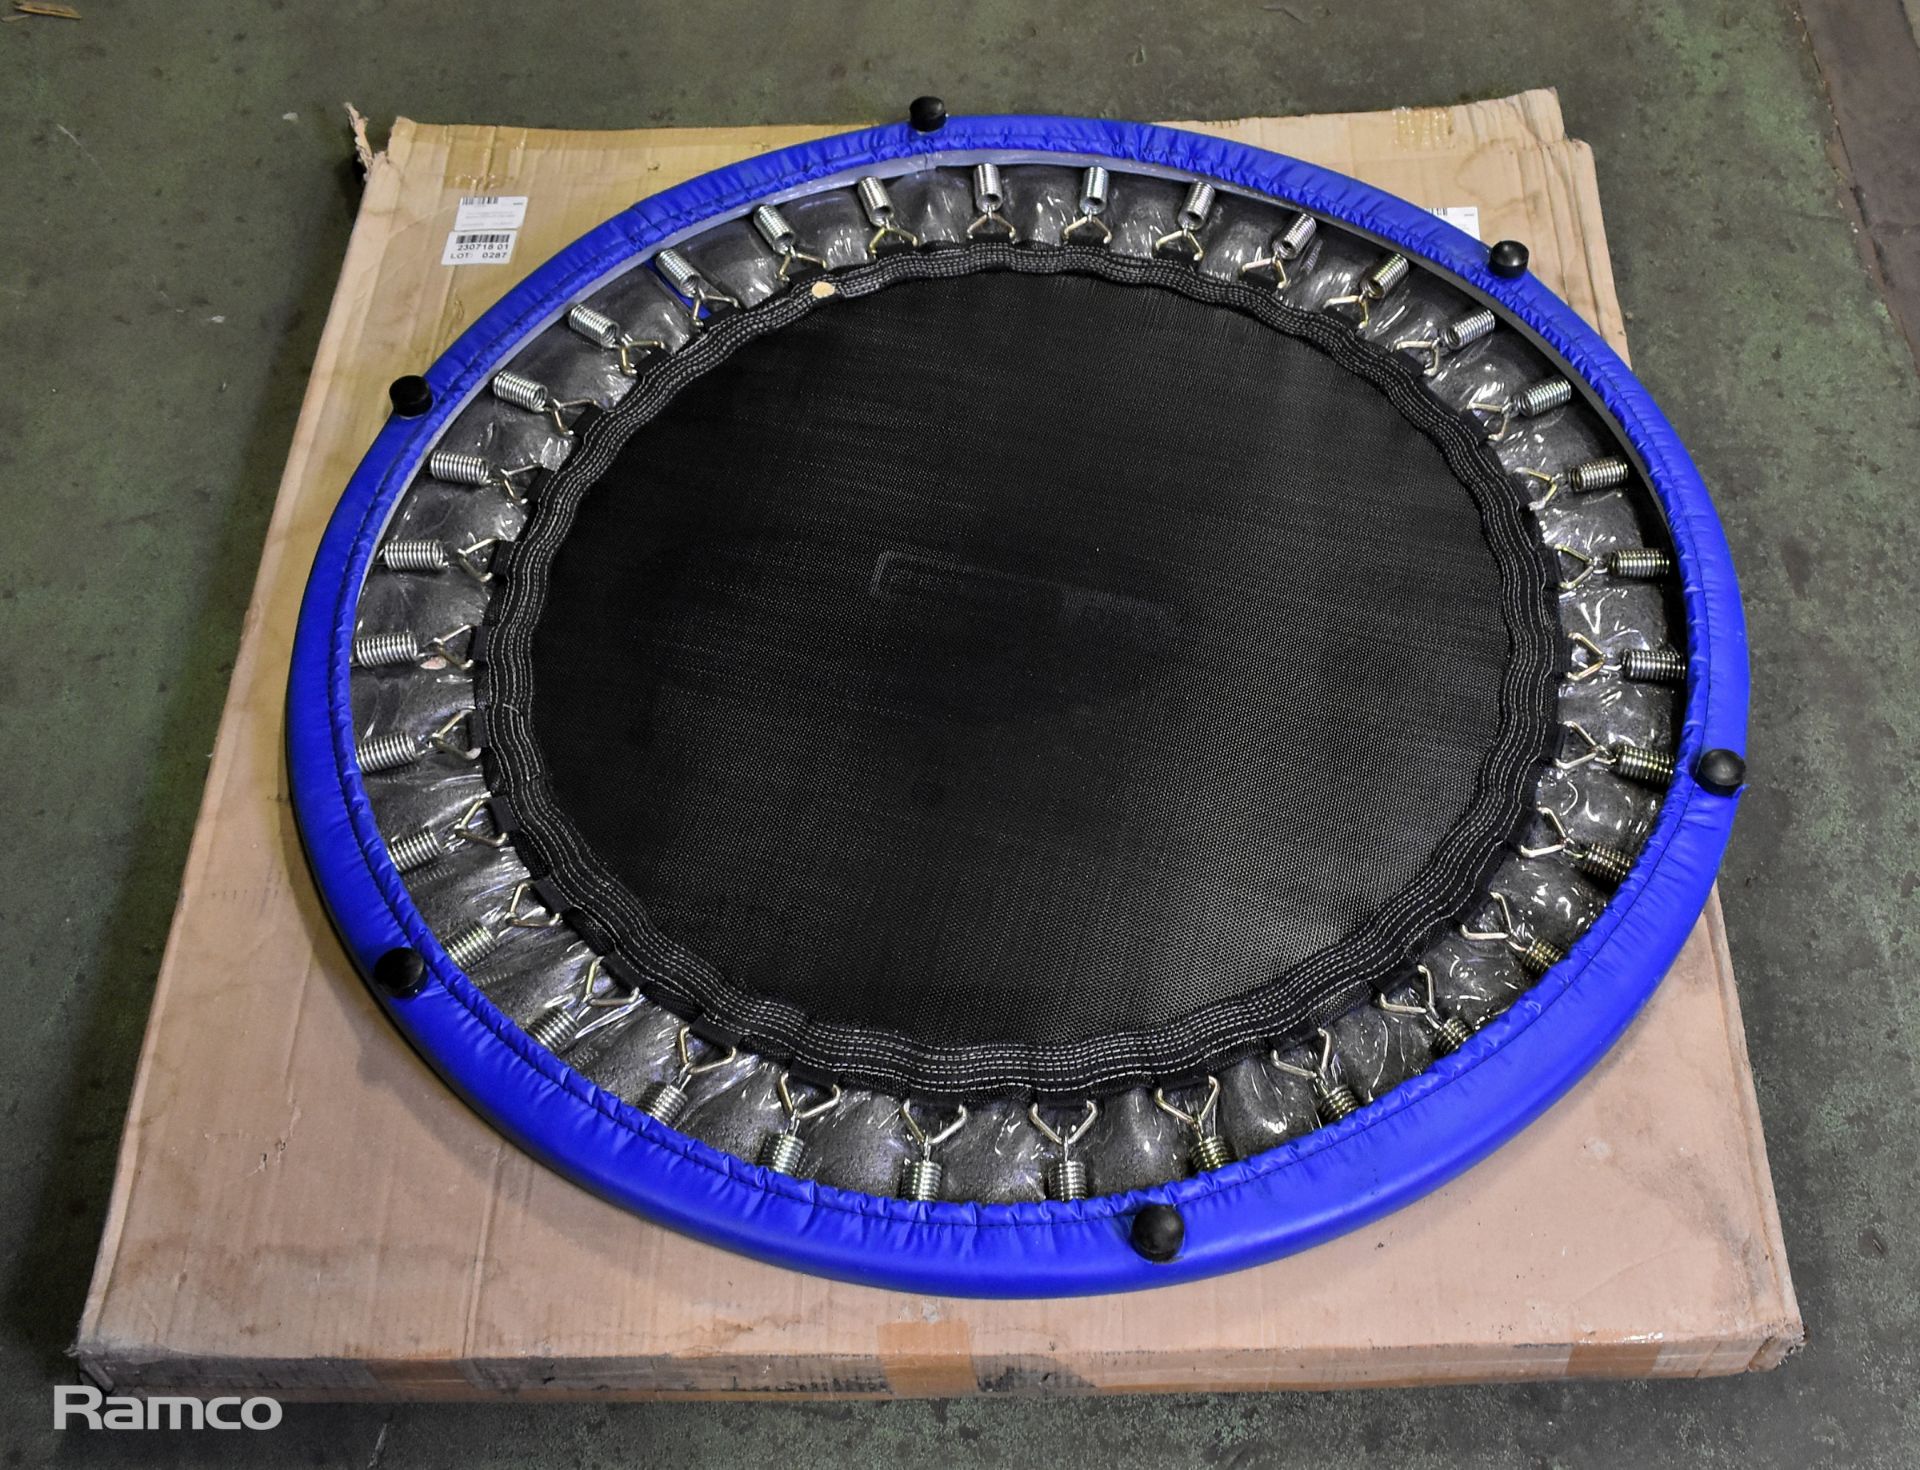 Pro Fitness trampoline - approx 900mm diameter - Image 2 of 3